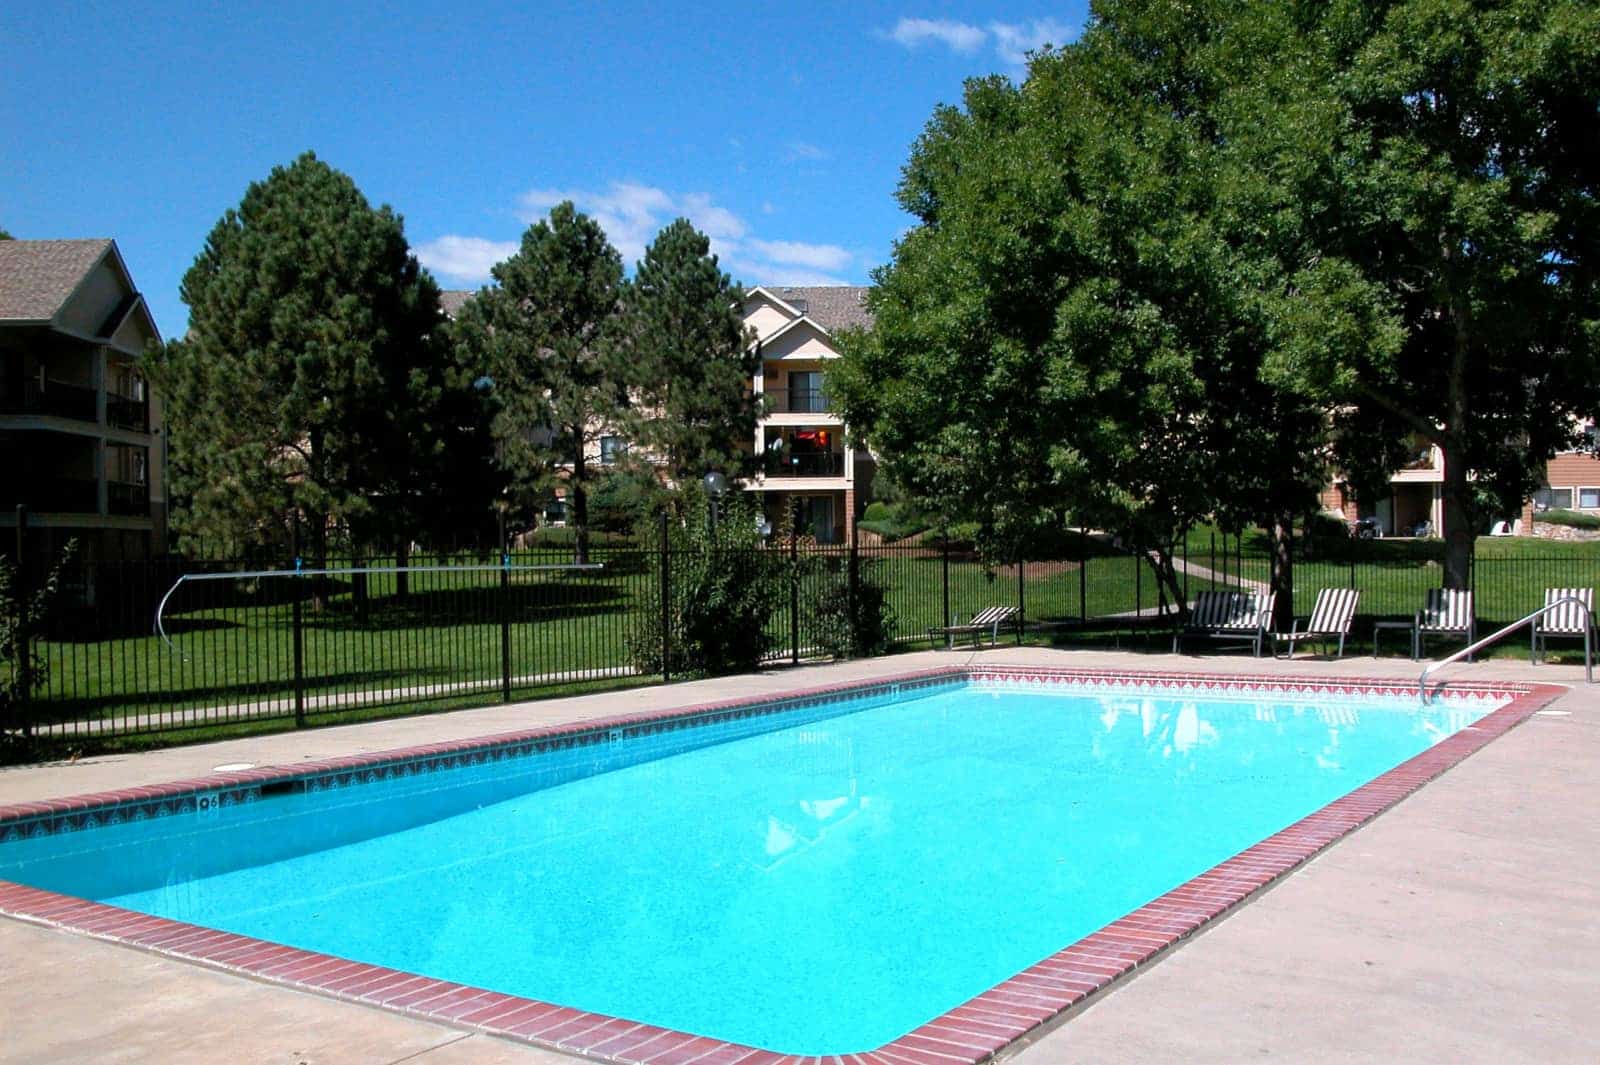 Outdoor pool surrounded by lawn and trees and apartment buildings.